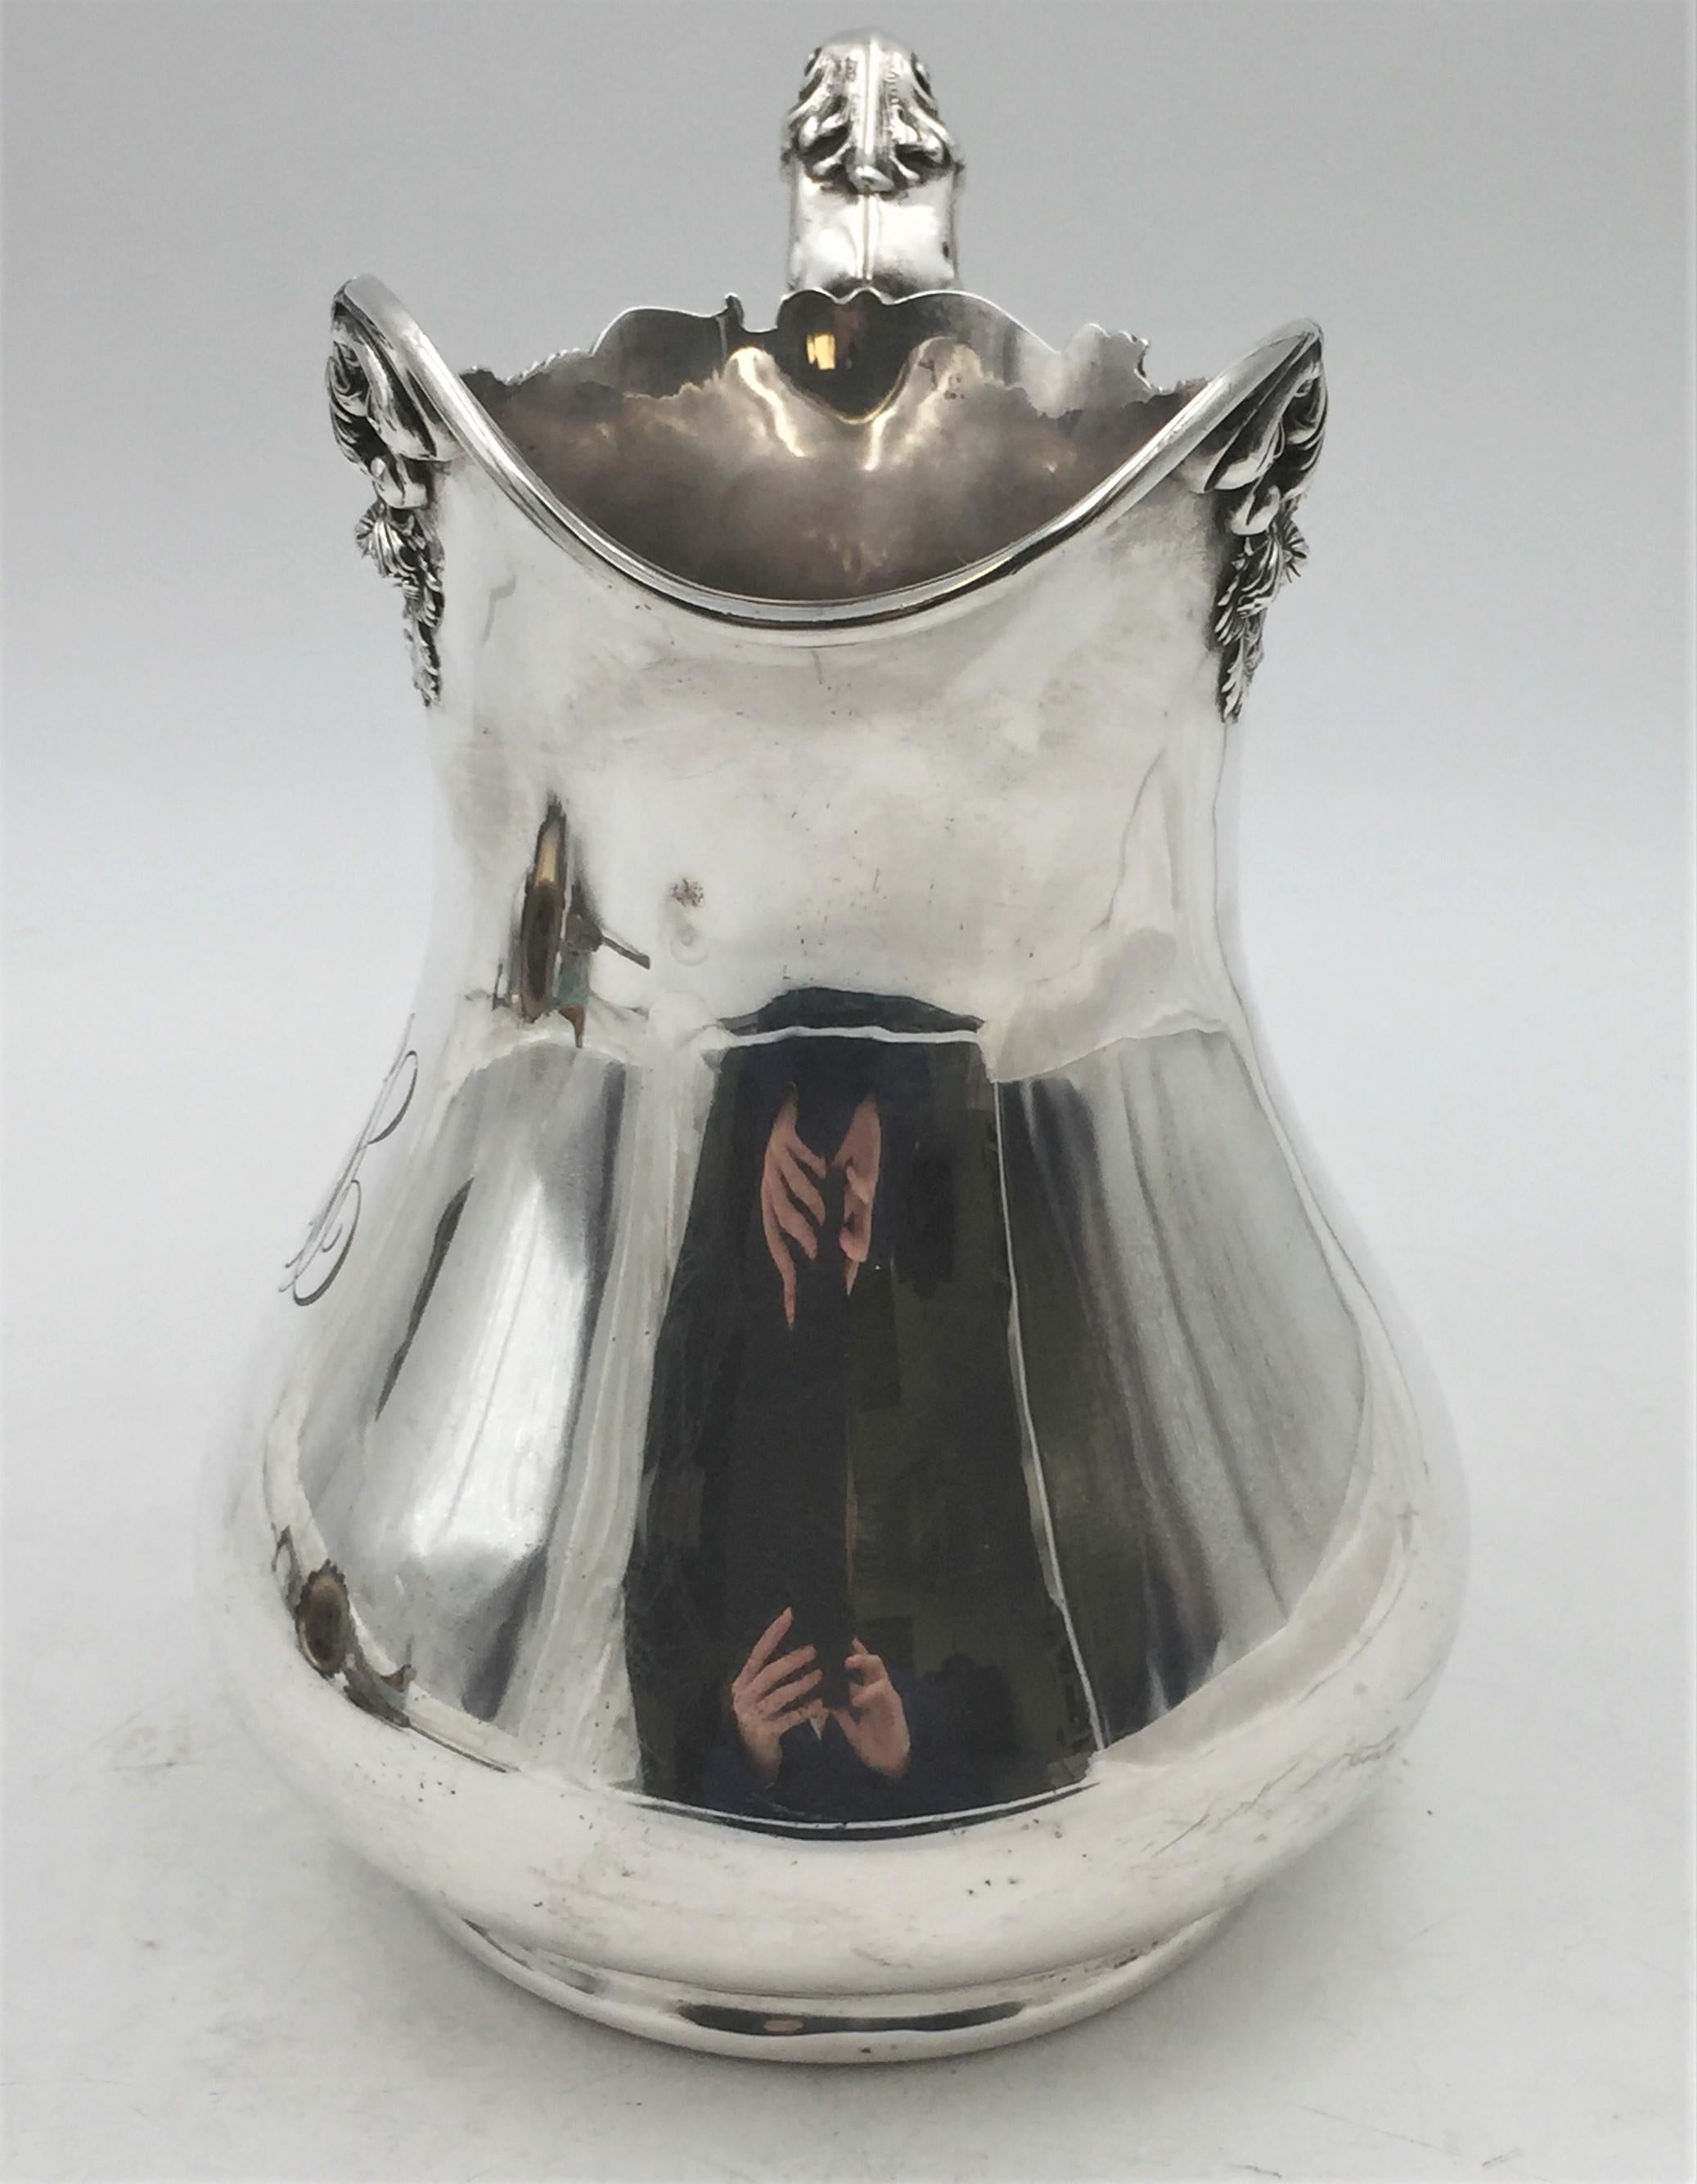 Early 20th century, Black, Starr & Frost sterling silver pitcher in exquisite Art Nouveau style with dimensional flowers applied around the rim. It measures 8 3/4'' in height by 9'' from handle to spout by 6 1/2'' in depth, weighs 22.9 ozt, shows